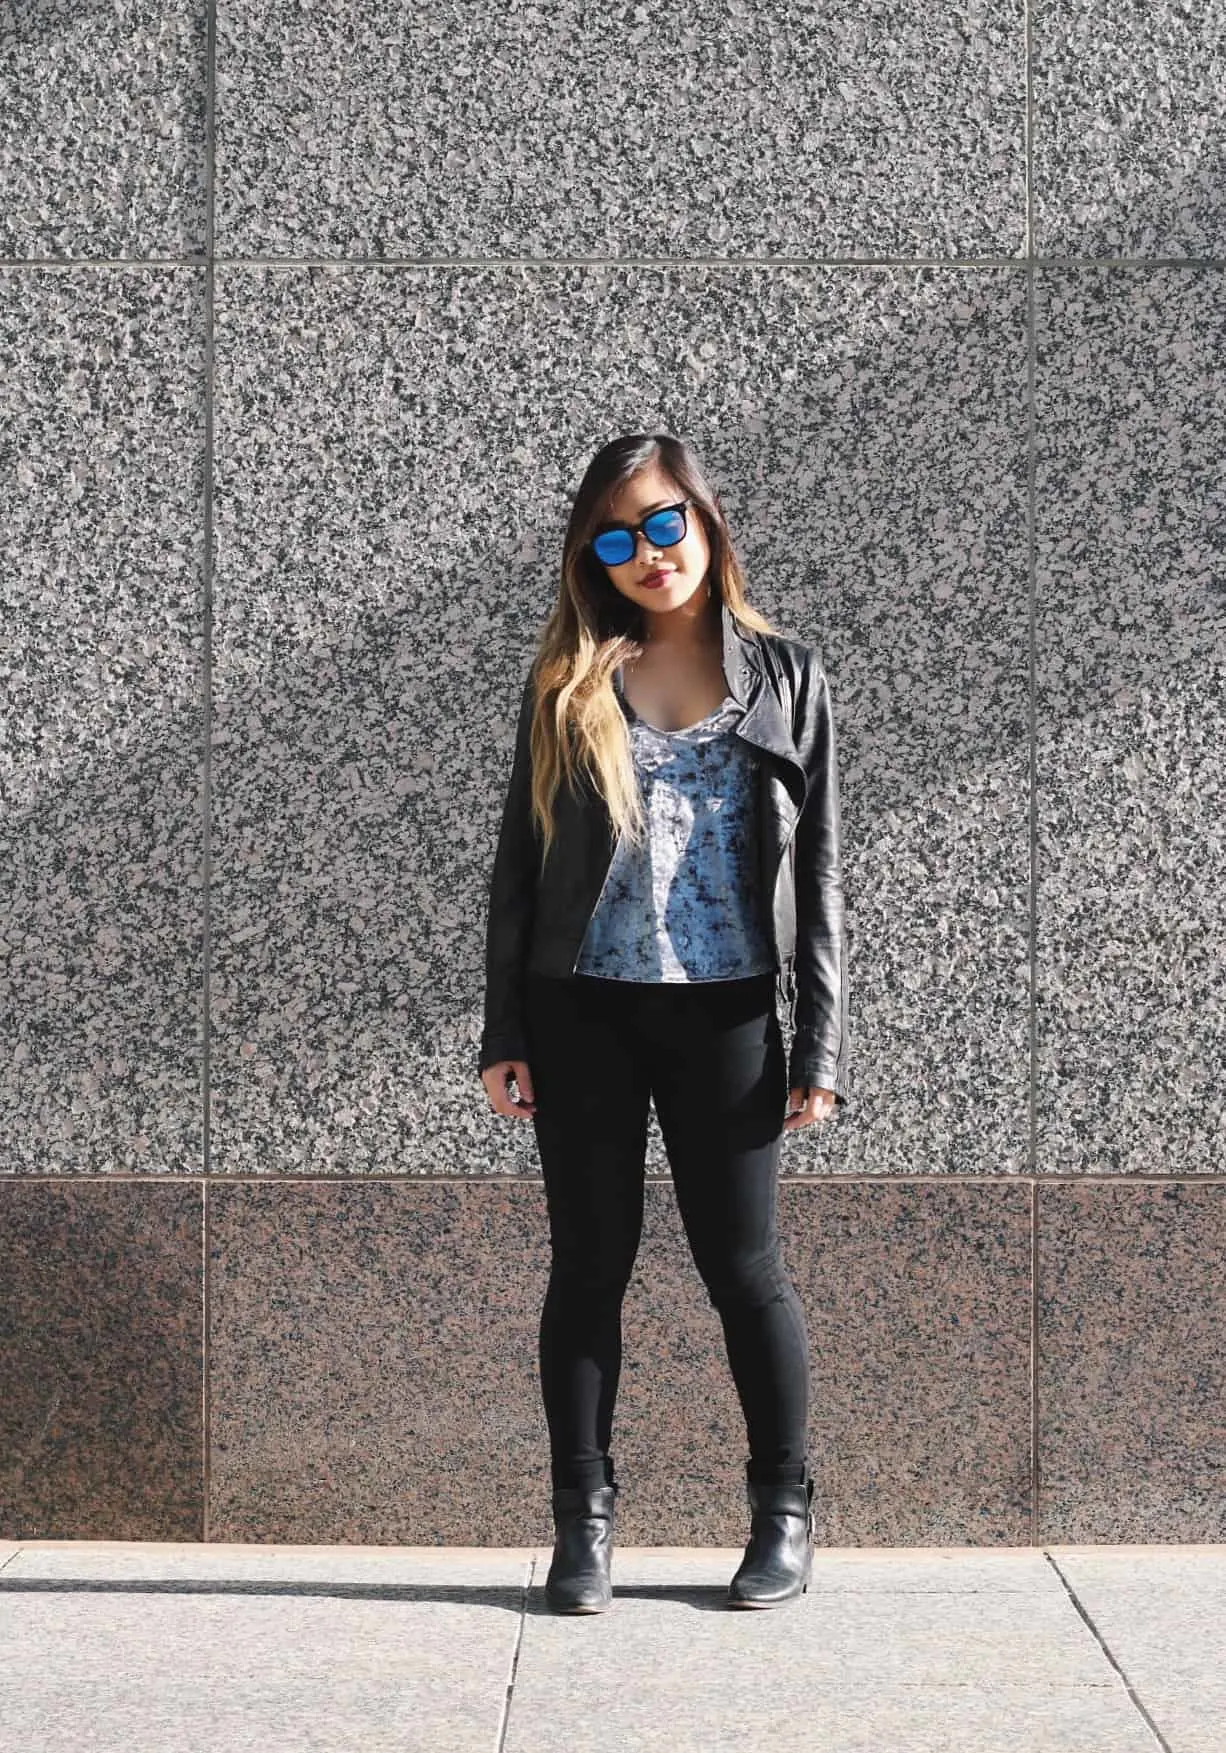 Casual fall outfit featuring black leather jacket and black denim